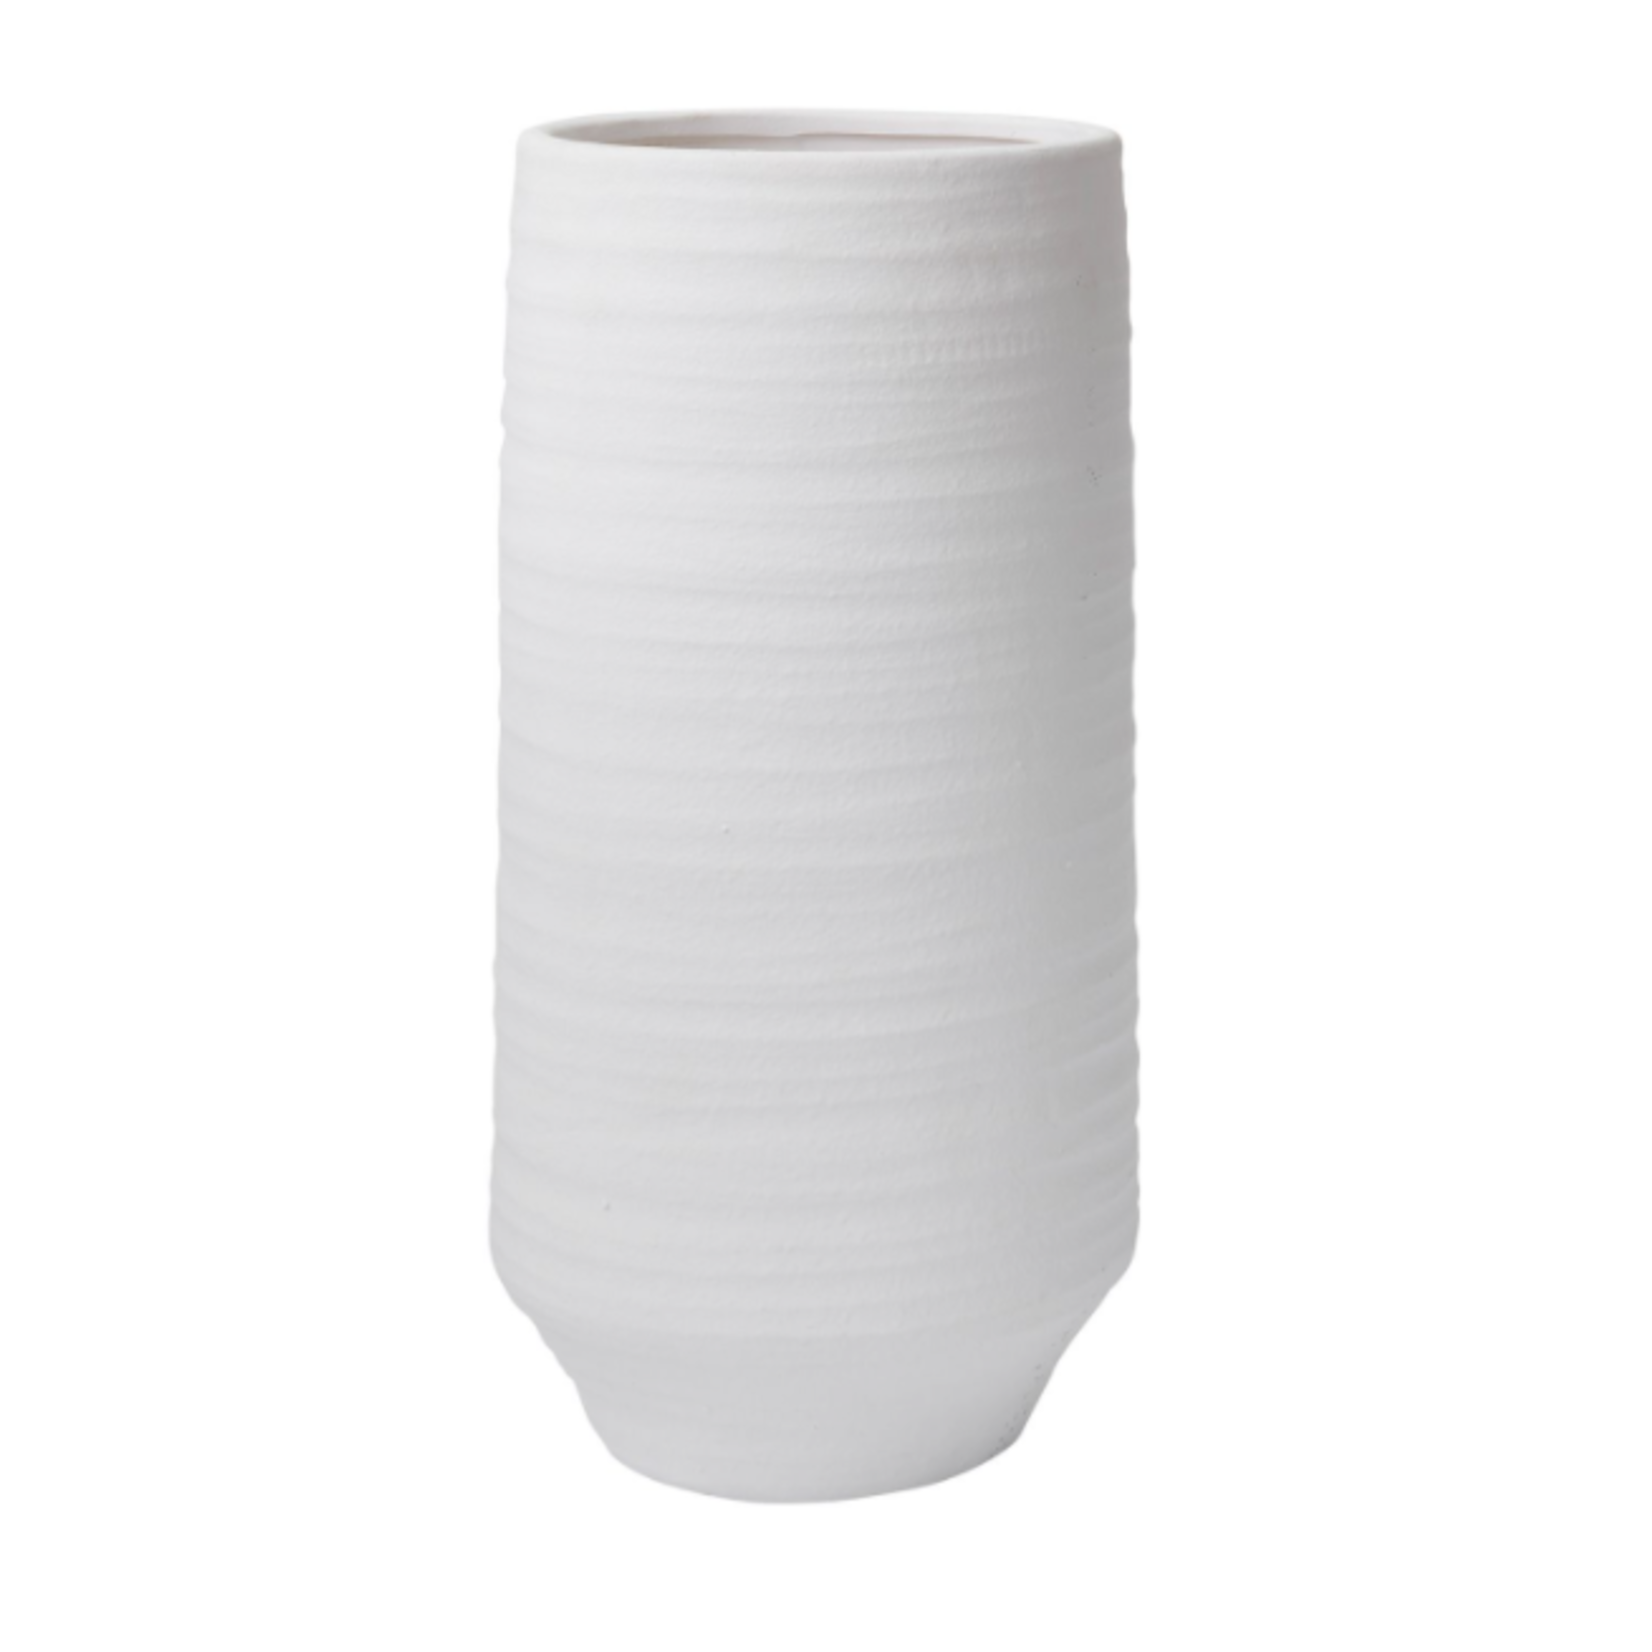 20”H X 9” WHITE VASE ANDRADE COLLECTION(AD) 96909.00